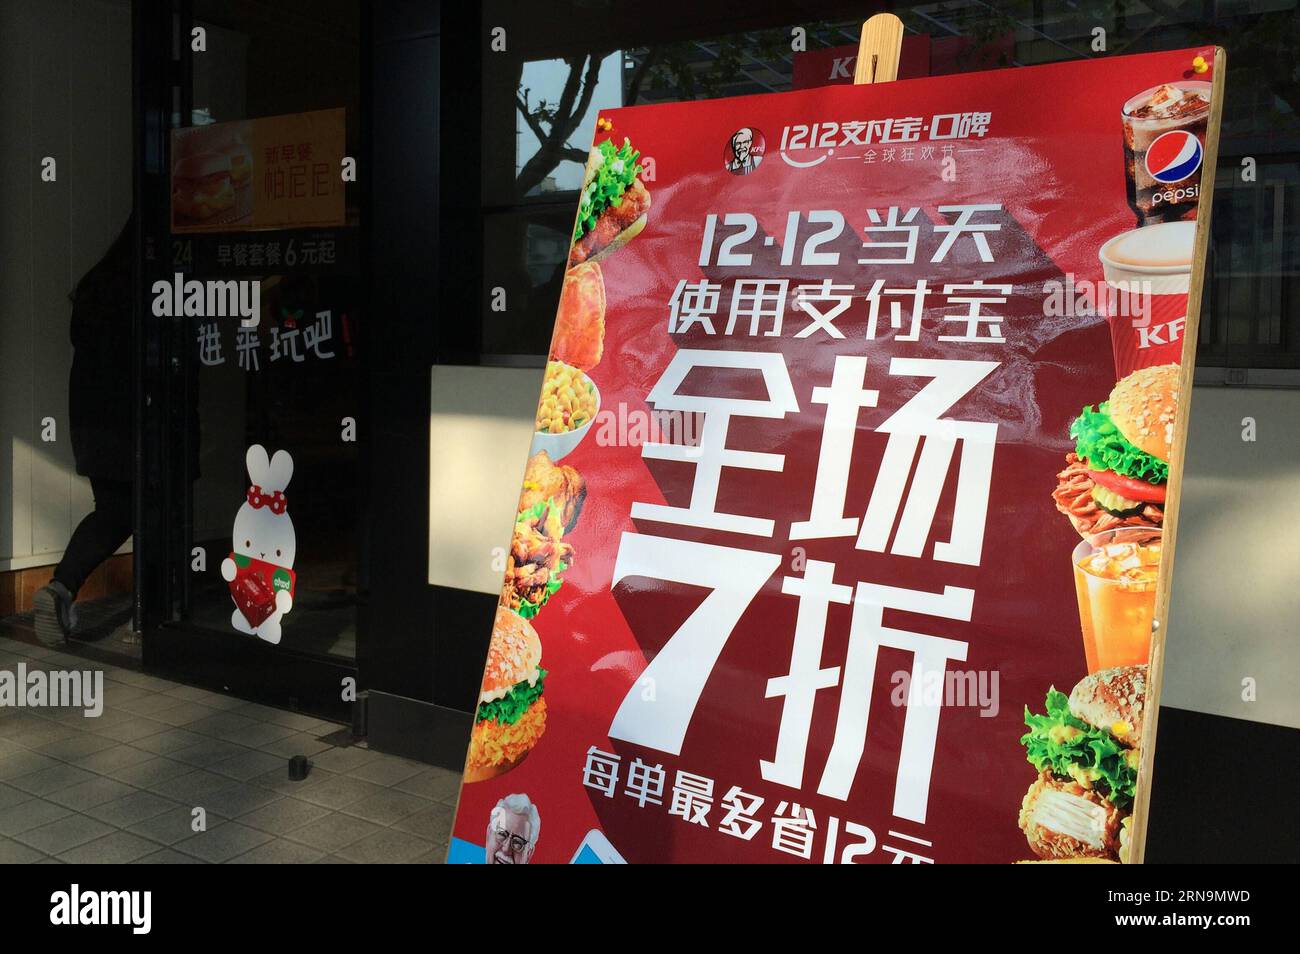 (151212) -- HANGZHOU, Dec. 12, 2015 -- A poster shows a 30-percent off sale promotion with alipay payment at the gate of a KFC store in Hangzhou, capital of east China s Zhejiang Province, Dec. 12, 2015. China s largest online payment platform Alipay and Koubei.com, both belongs to Alibaba Group, joined hands to promote an offline sales promotion, in which customers are entitled to enjoy discount with payment by Alipay. More than 300,000 offline merchants at home and abroad took part in the event. ) (lfj) CHINA-ALIBABA-OFFLINE PROMOTION (CN) JuxHuanzong PUBLICATIONxNOTxINxCHN   151212 Hangzhou Stock Photo